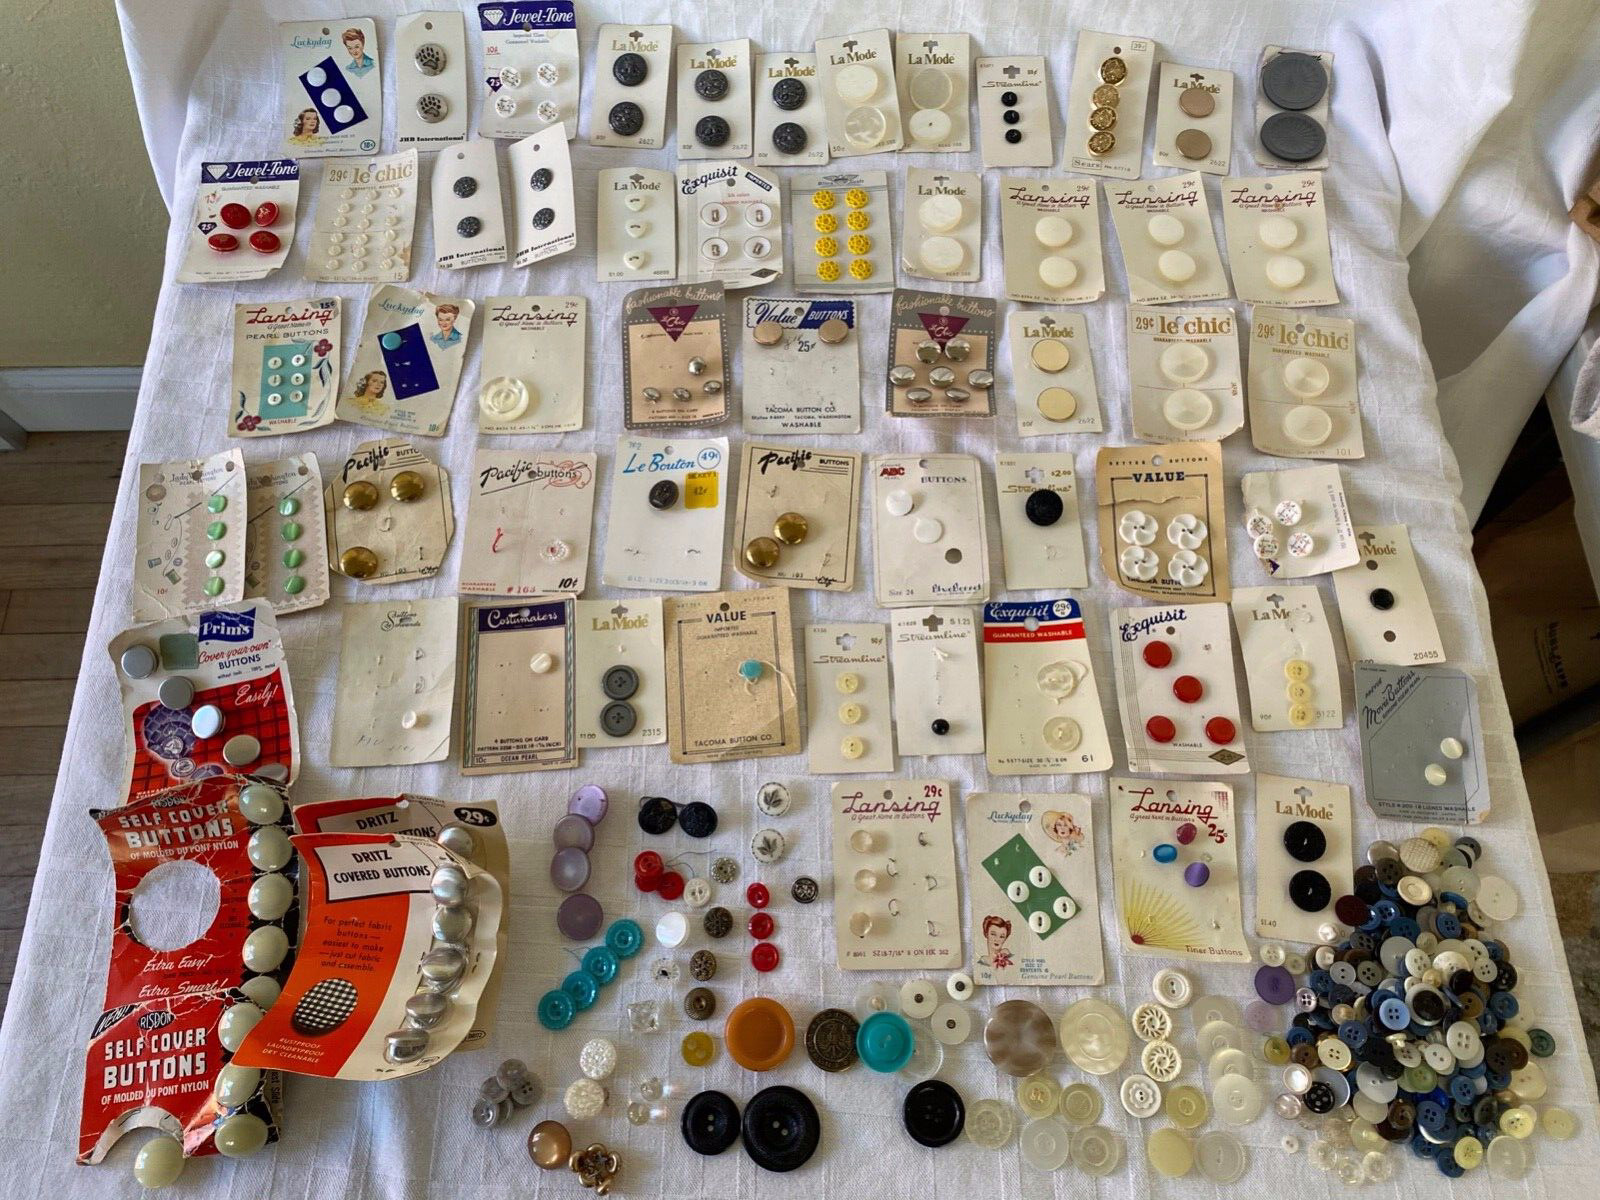 Large Lot of Vintage Buttons on Cards and loose weighs 1 pound 4 ounces